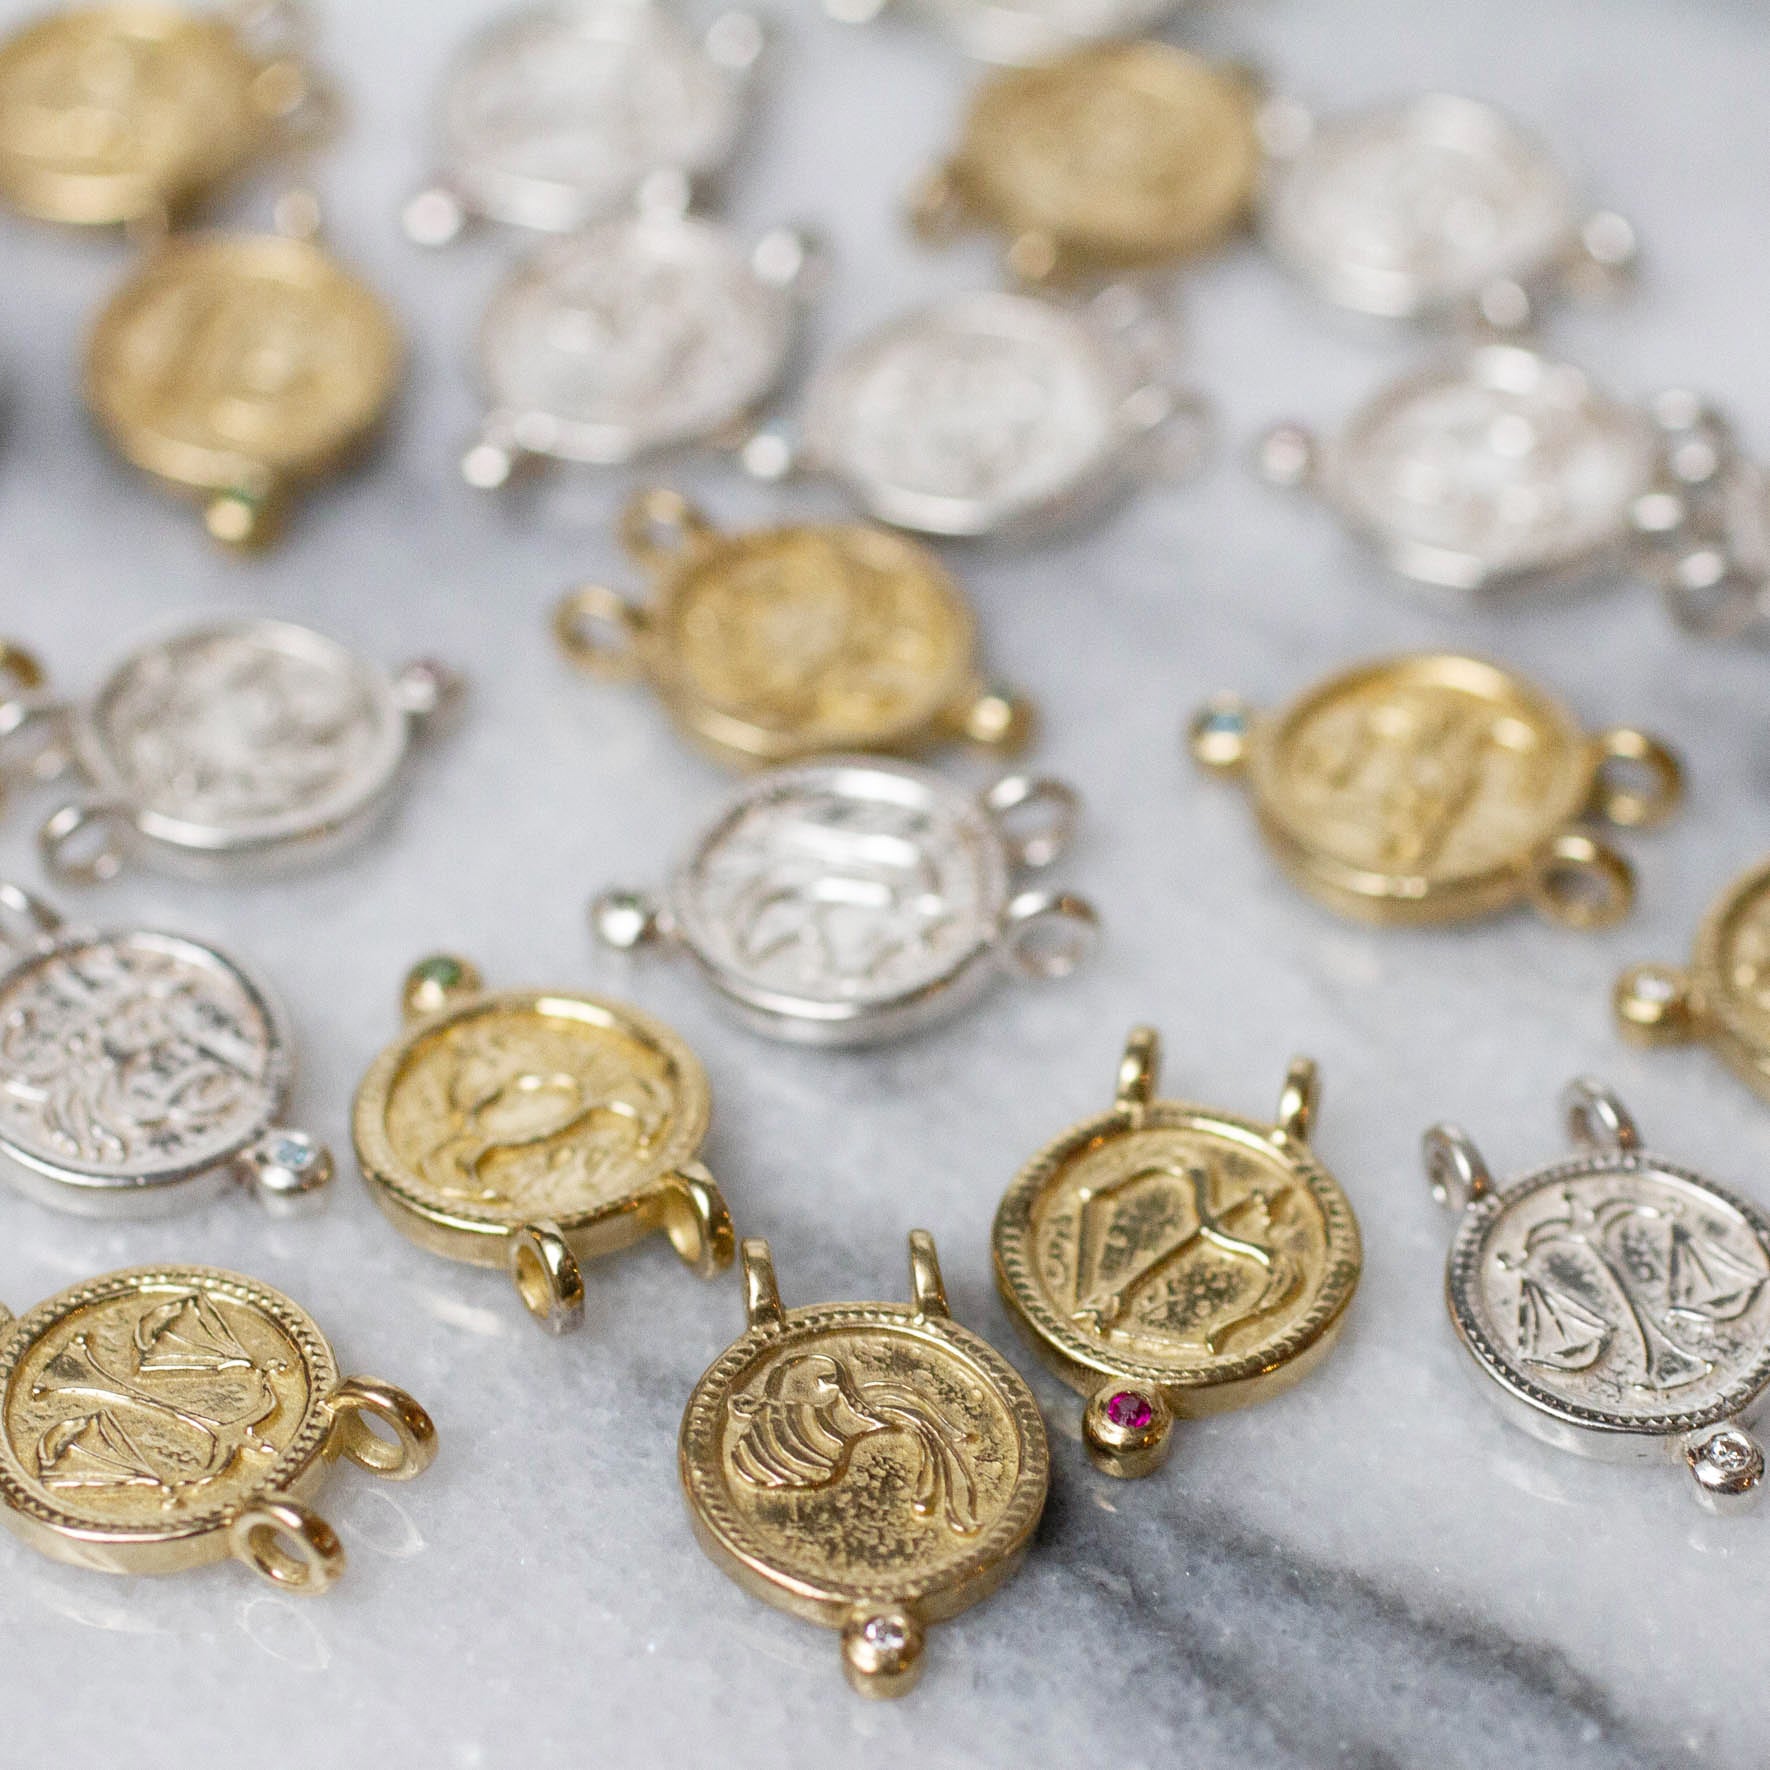 Our Expanded Zodiac Collection